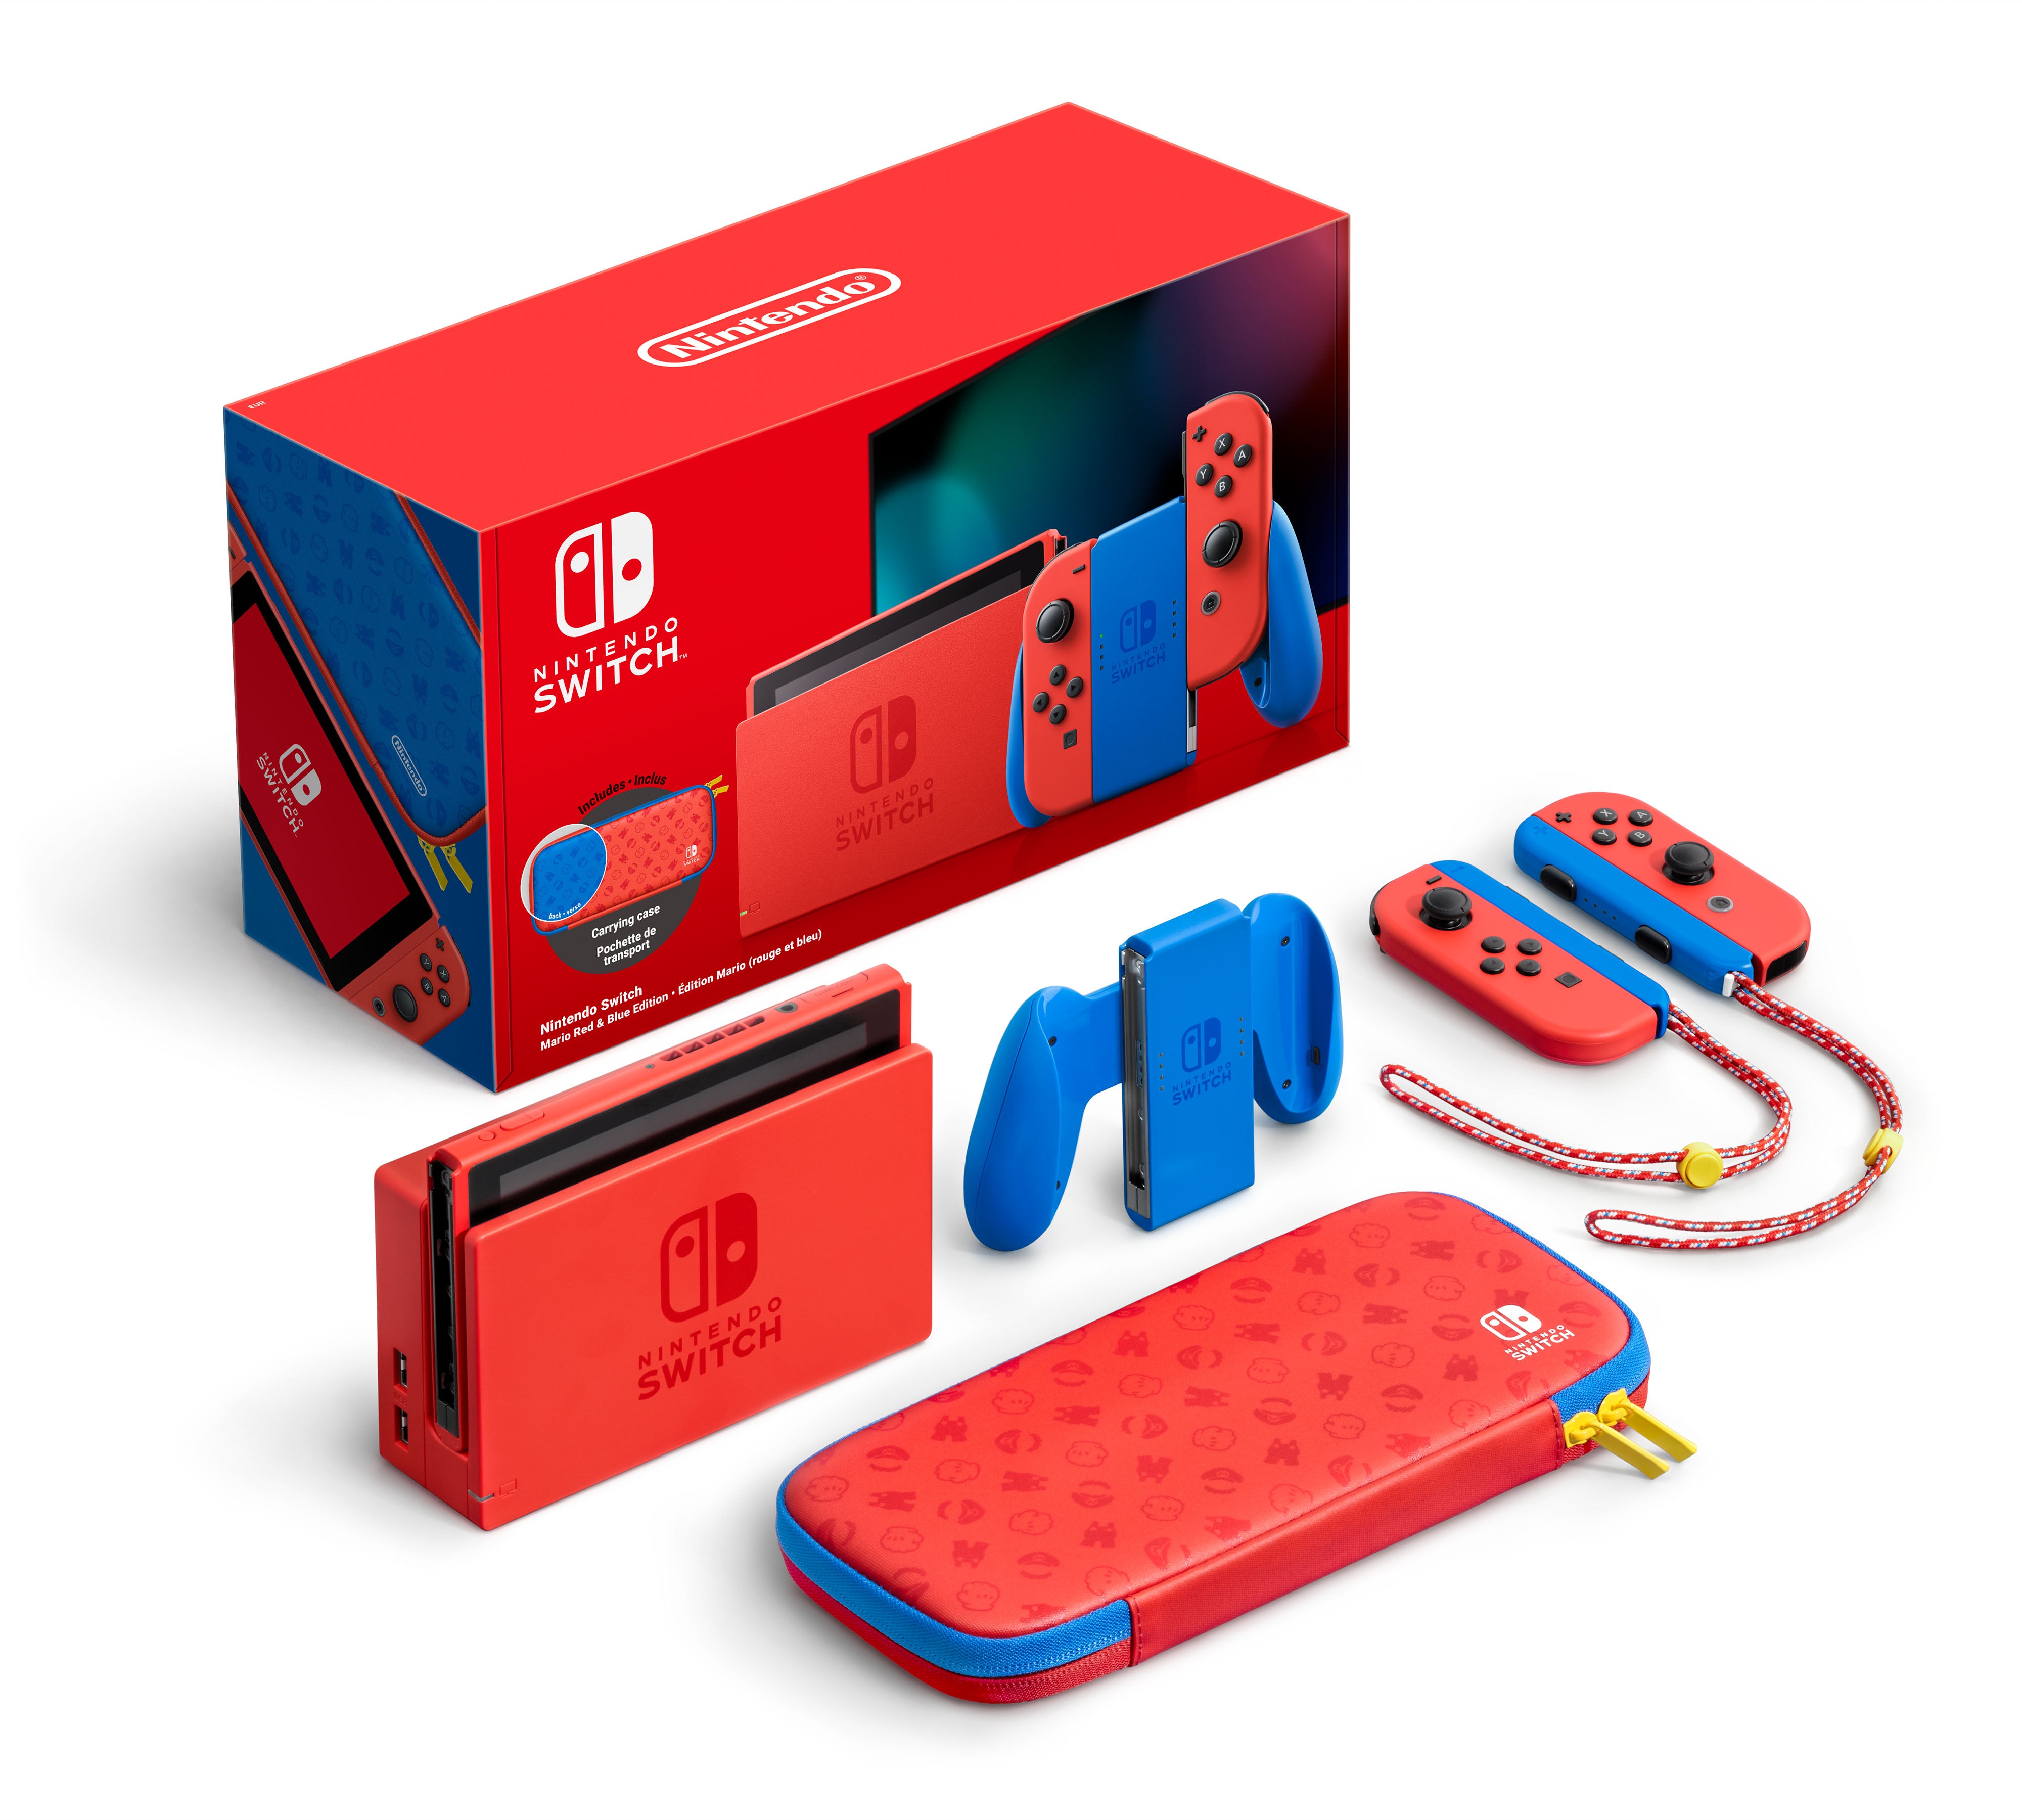 Image for The Nintendo Switch Mario Red and Blue Edition is available to pre-order at these retailers